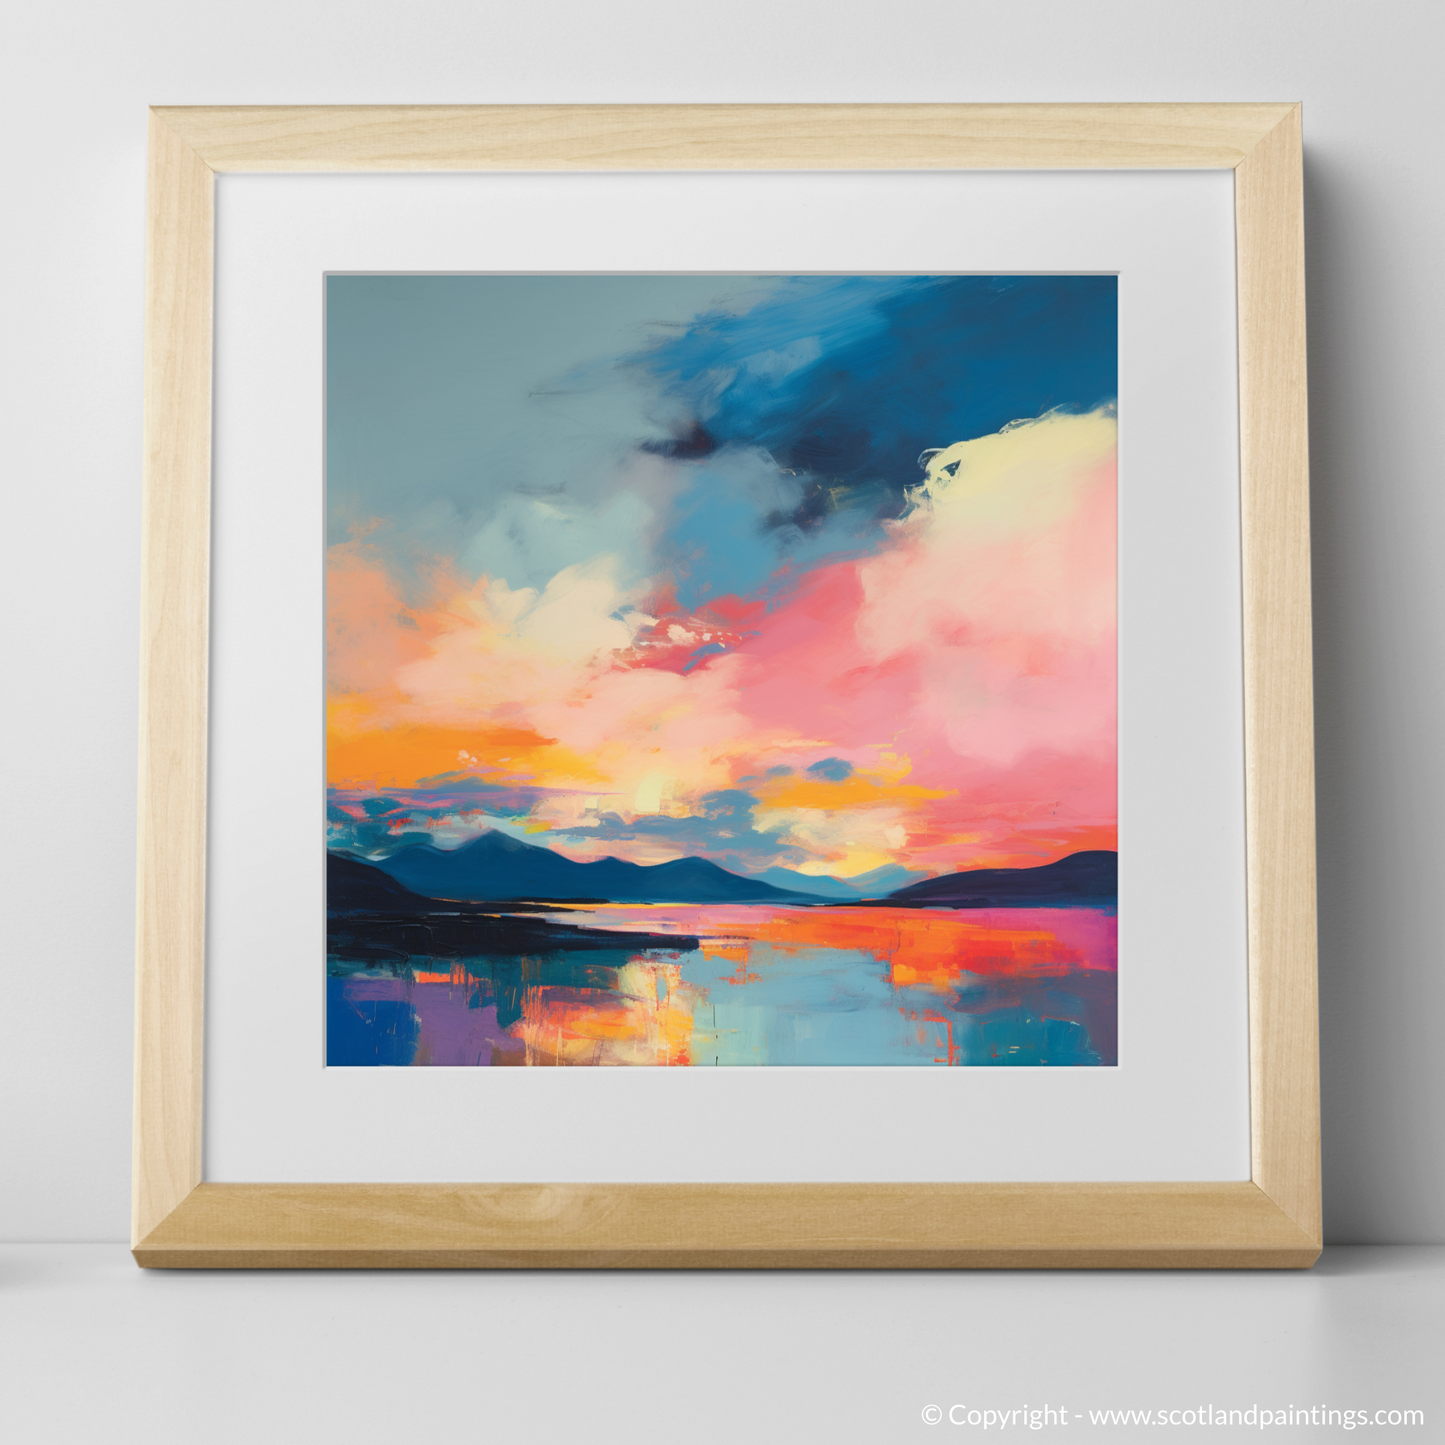 Art Print of A huge sky above Loch Lomond with a natural frame